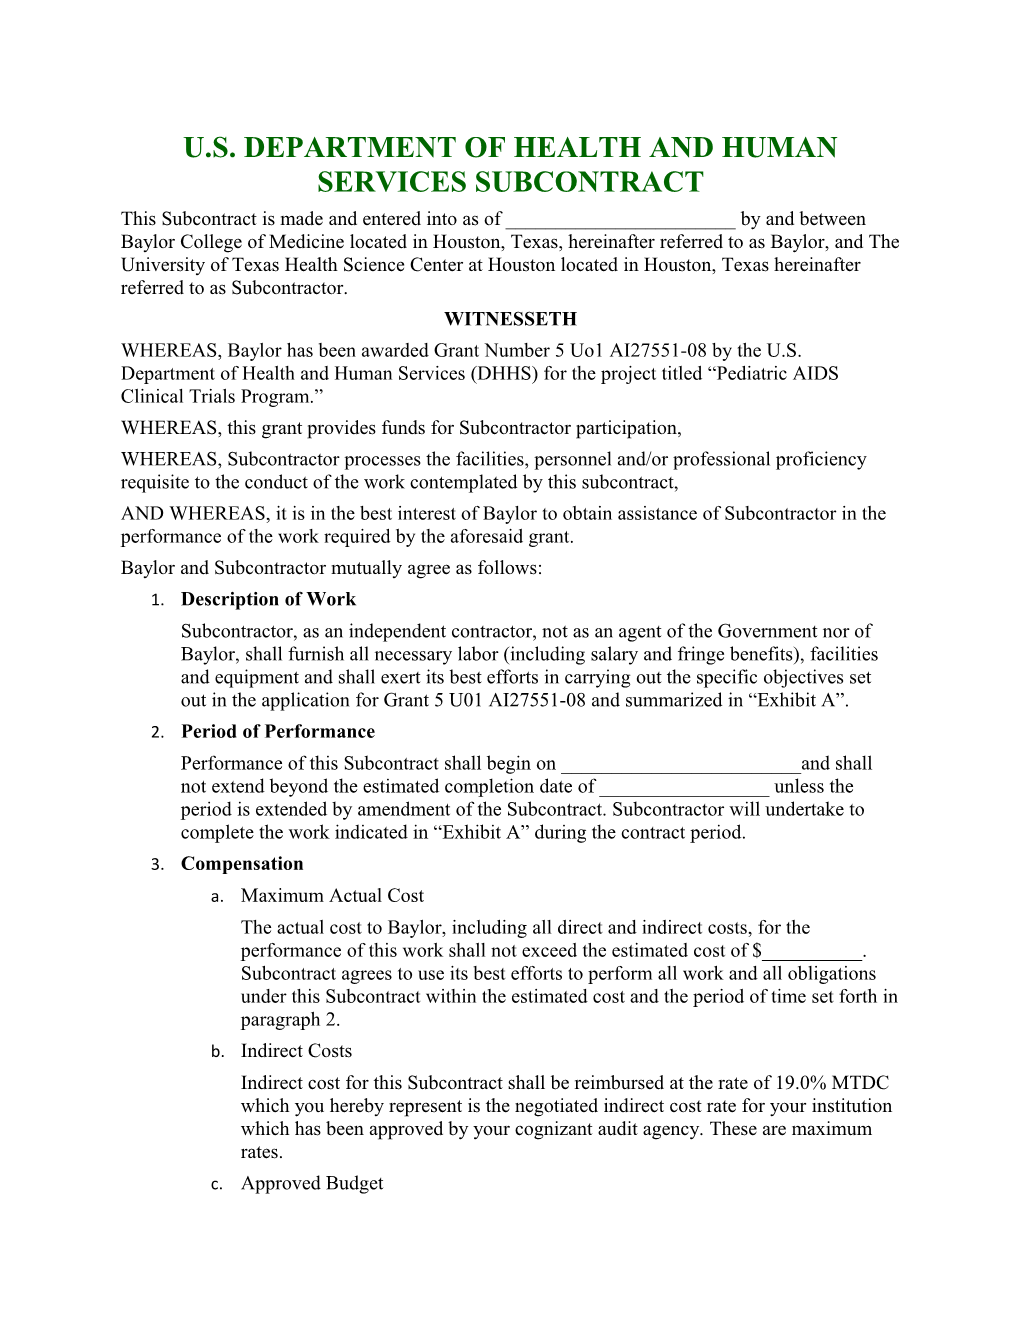 U.S. Department of Health and Human Services Subcontract